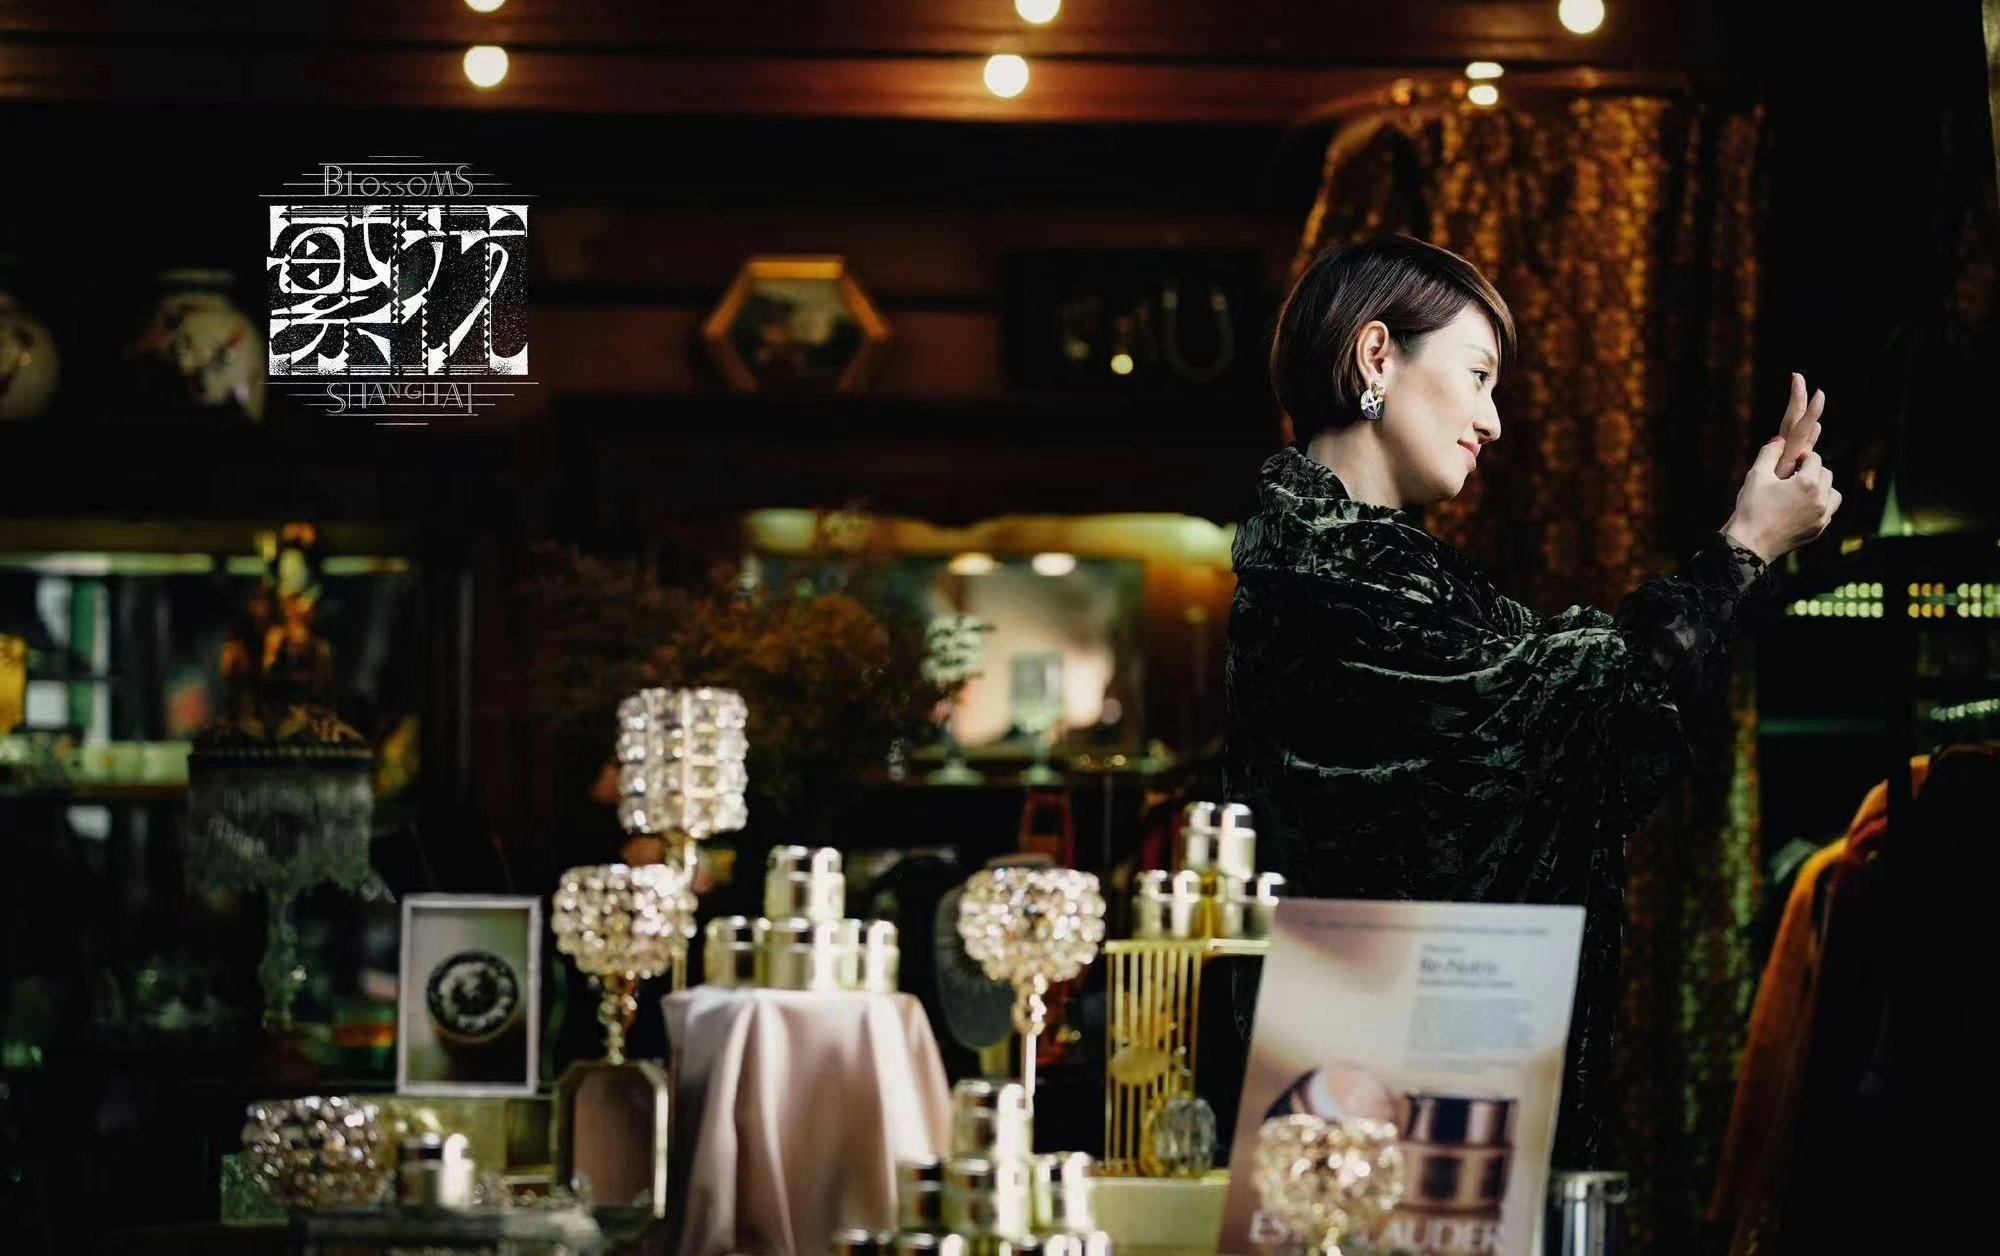 Estée Lauder's skincare products appear in a scene of 'Blossoms Shanghai.'